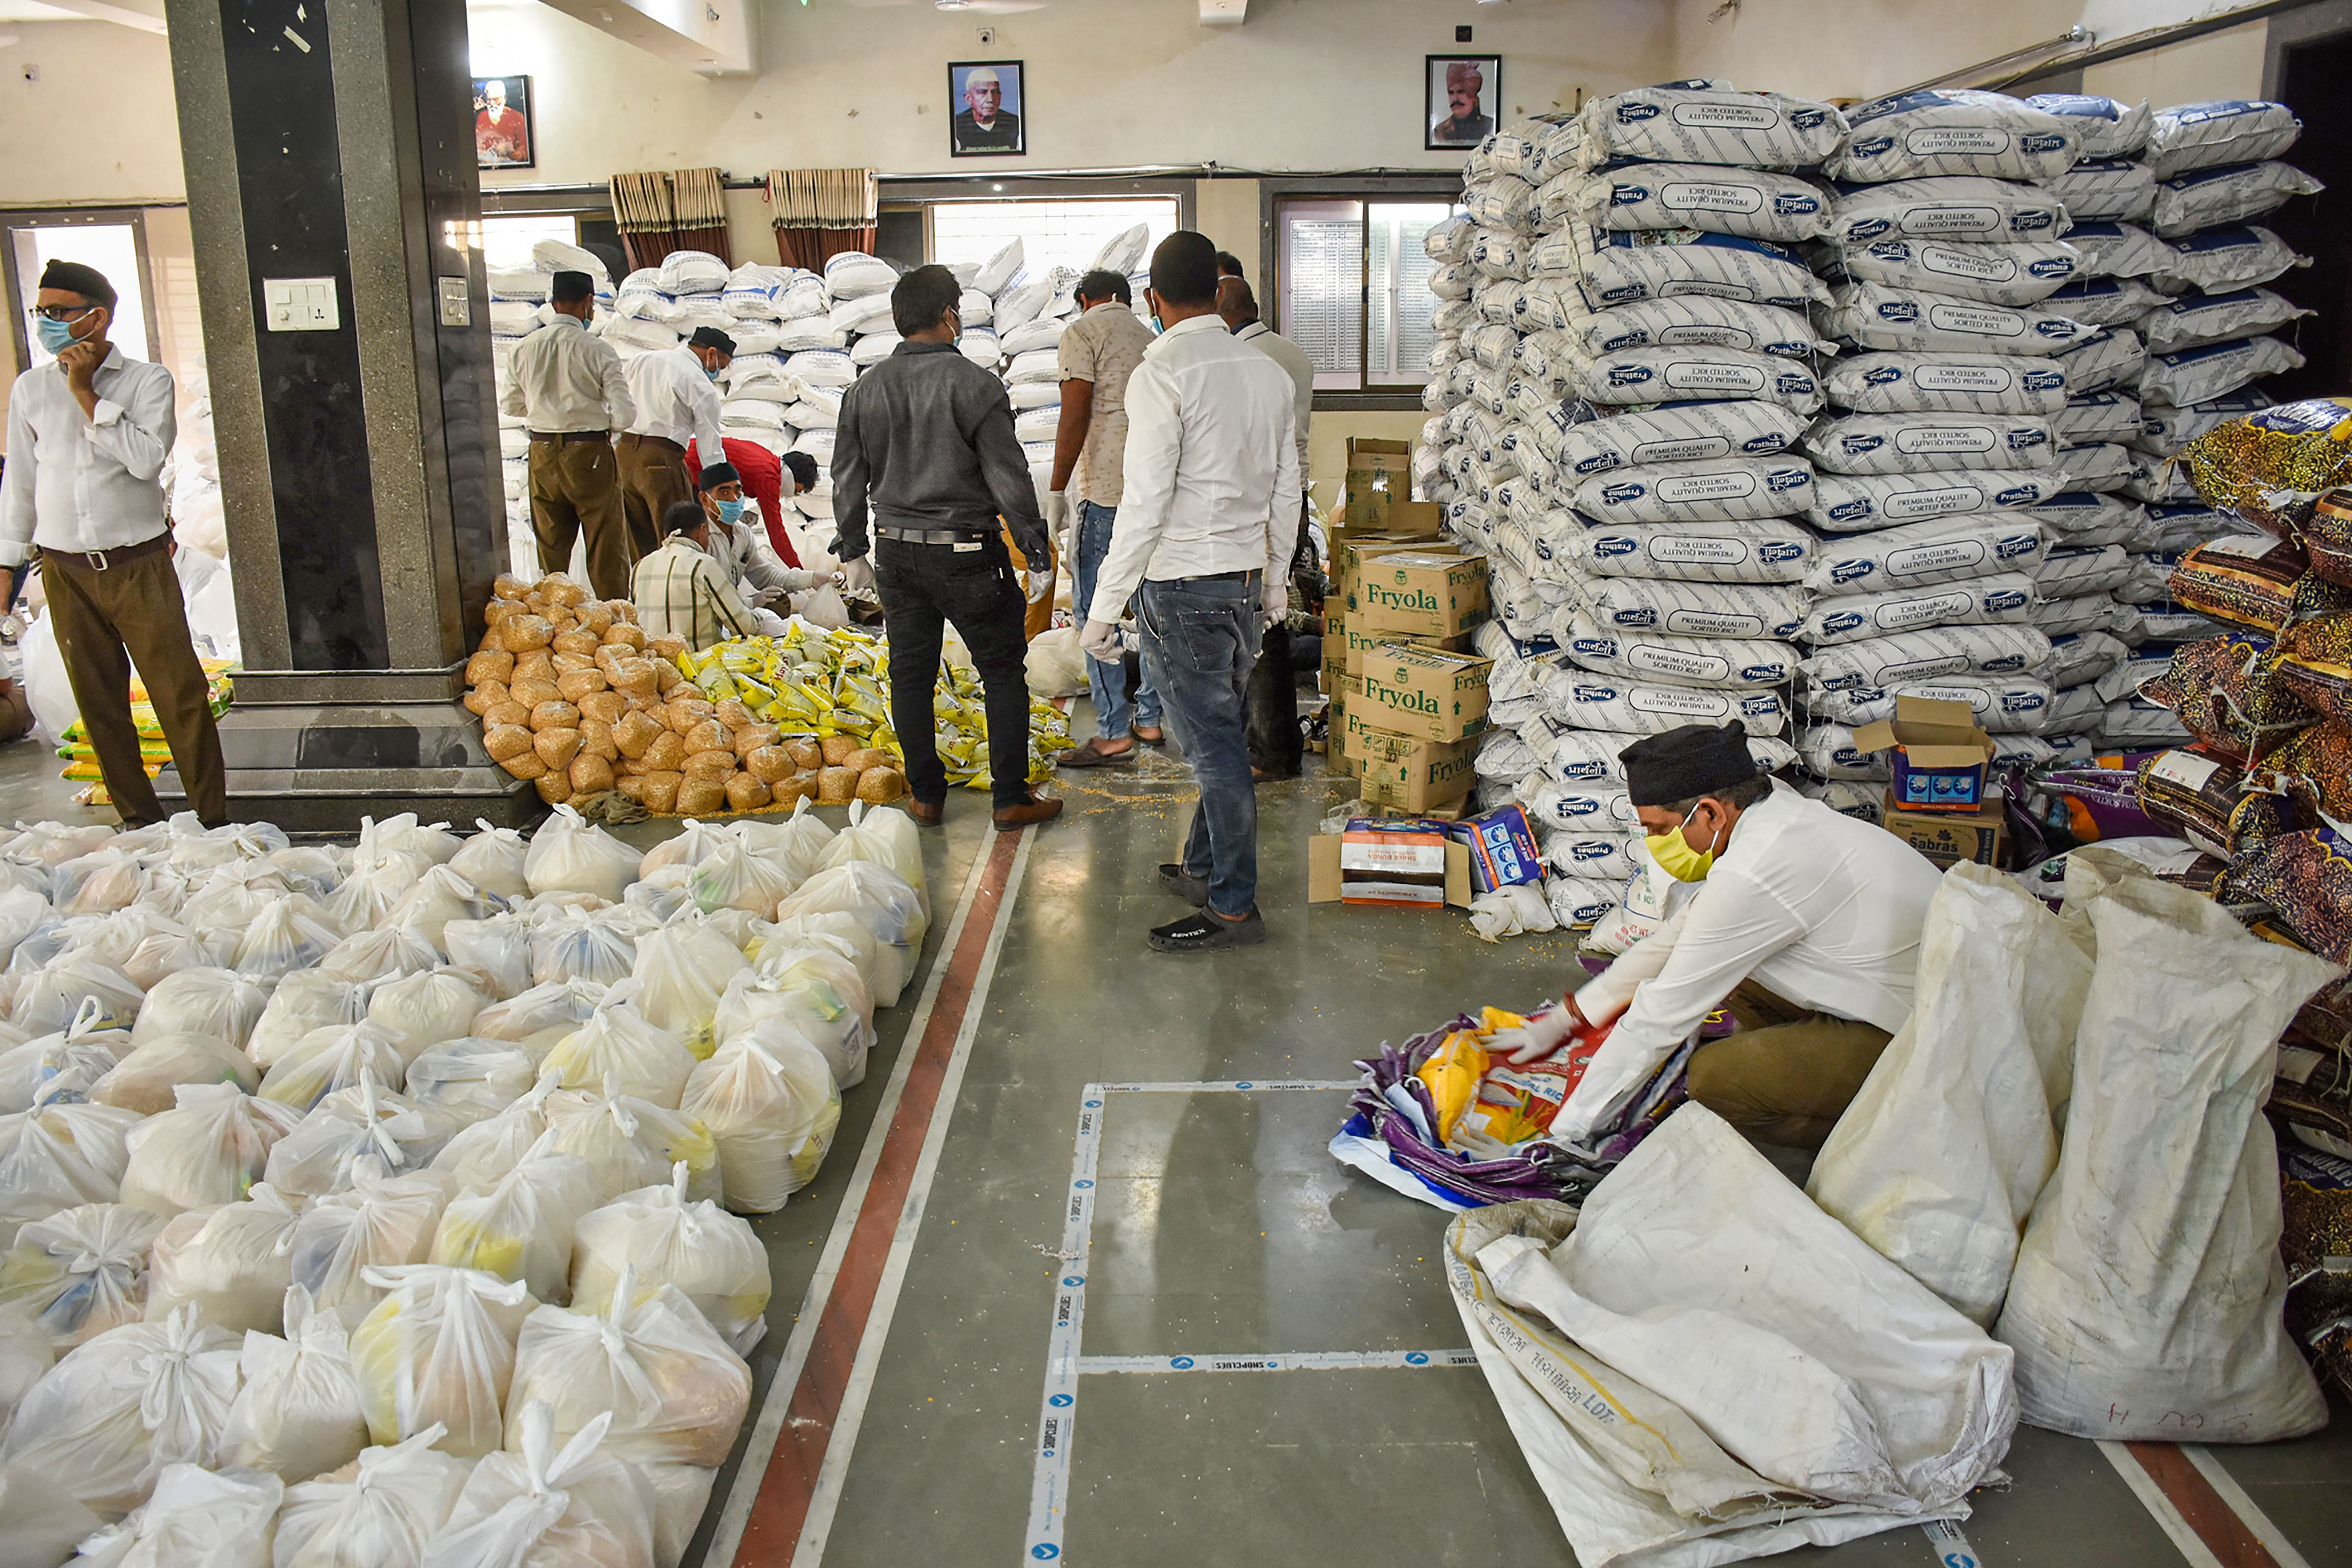 RSS workers pack food to distribute among needy people during a nationwide lockdown in the wake of coronavirus pandemic. (Credit: PTI Photo)